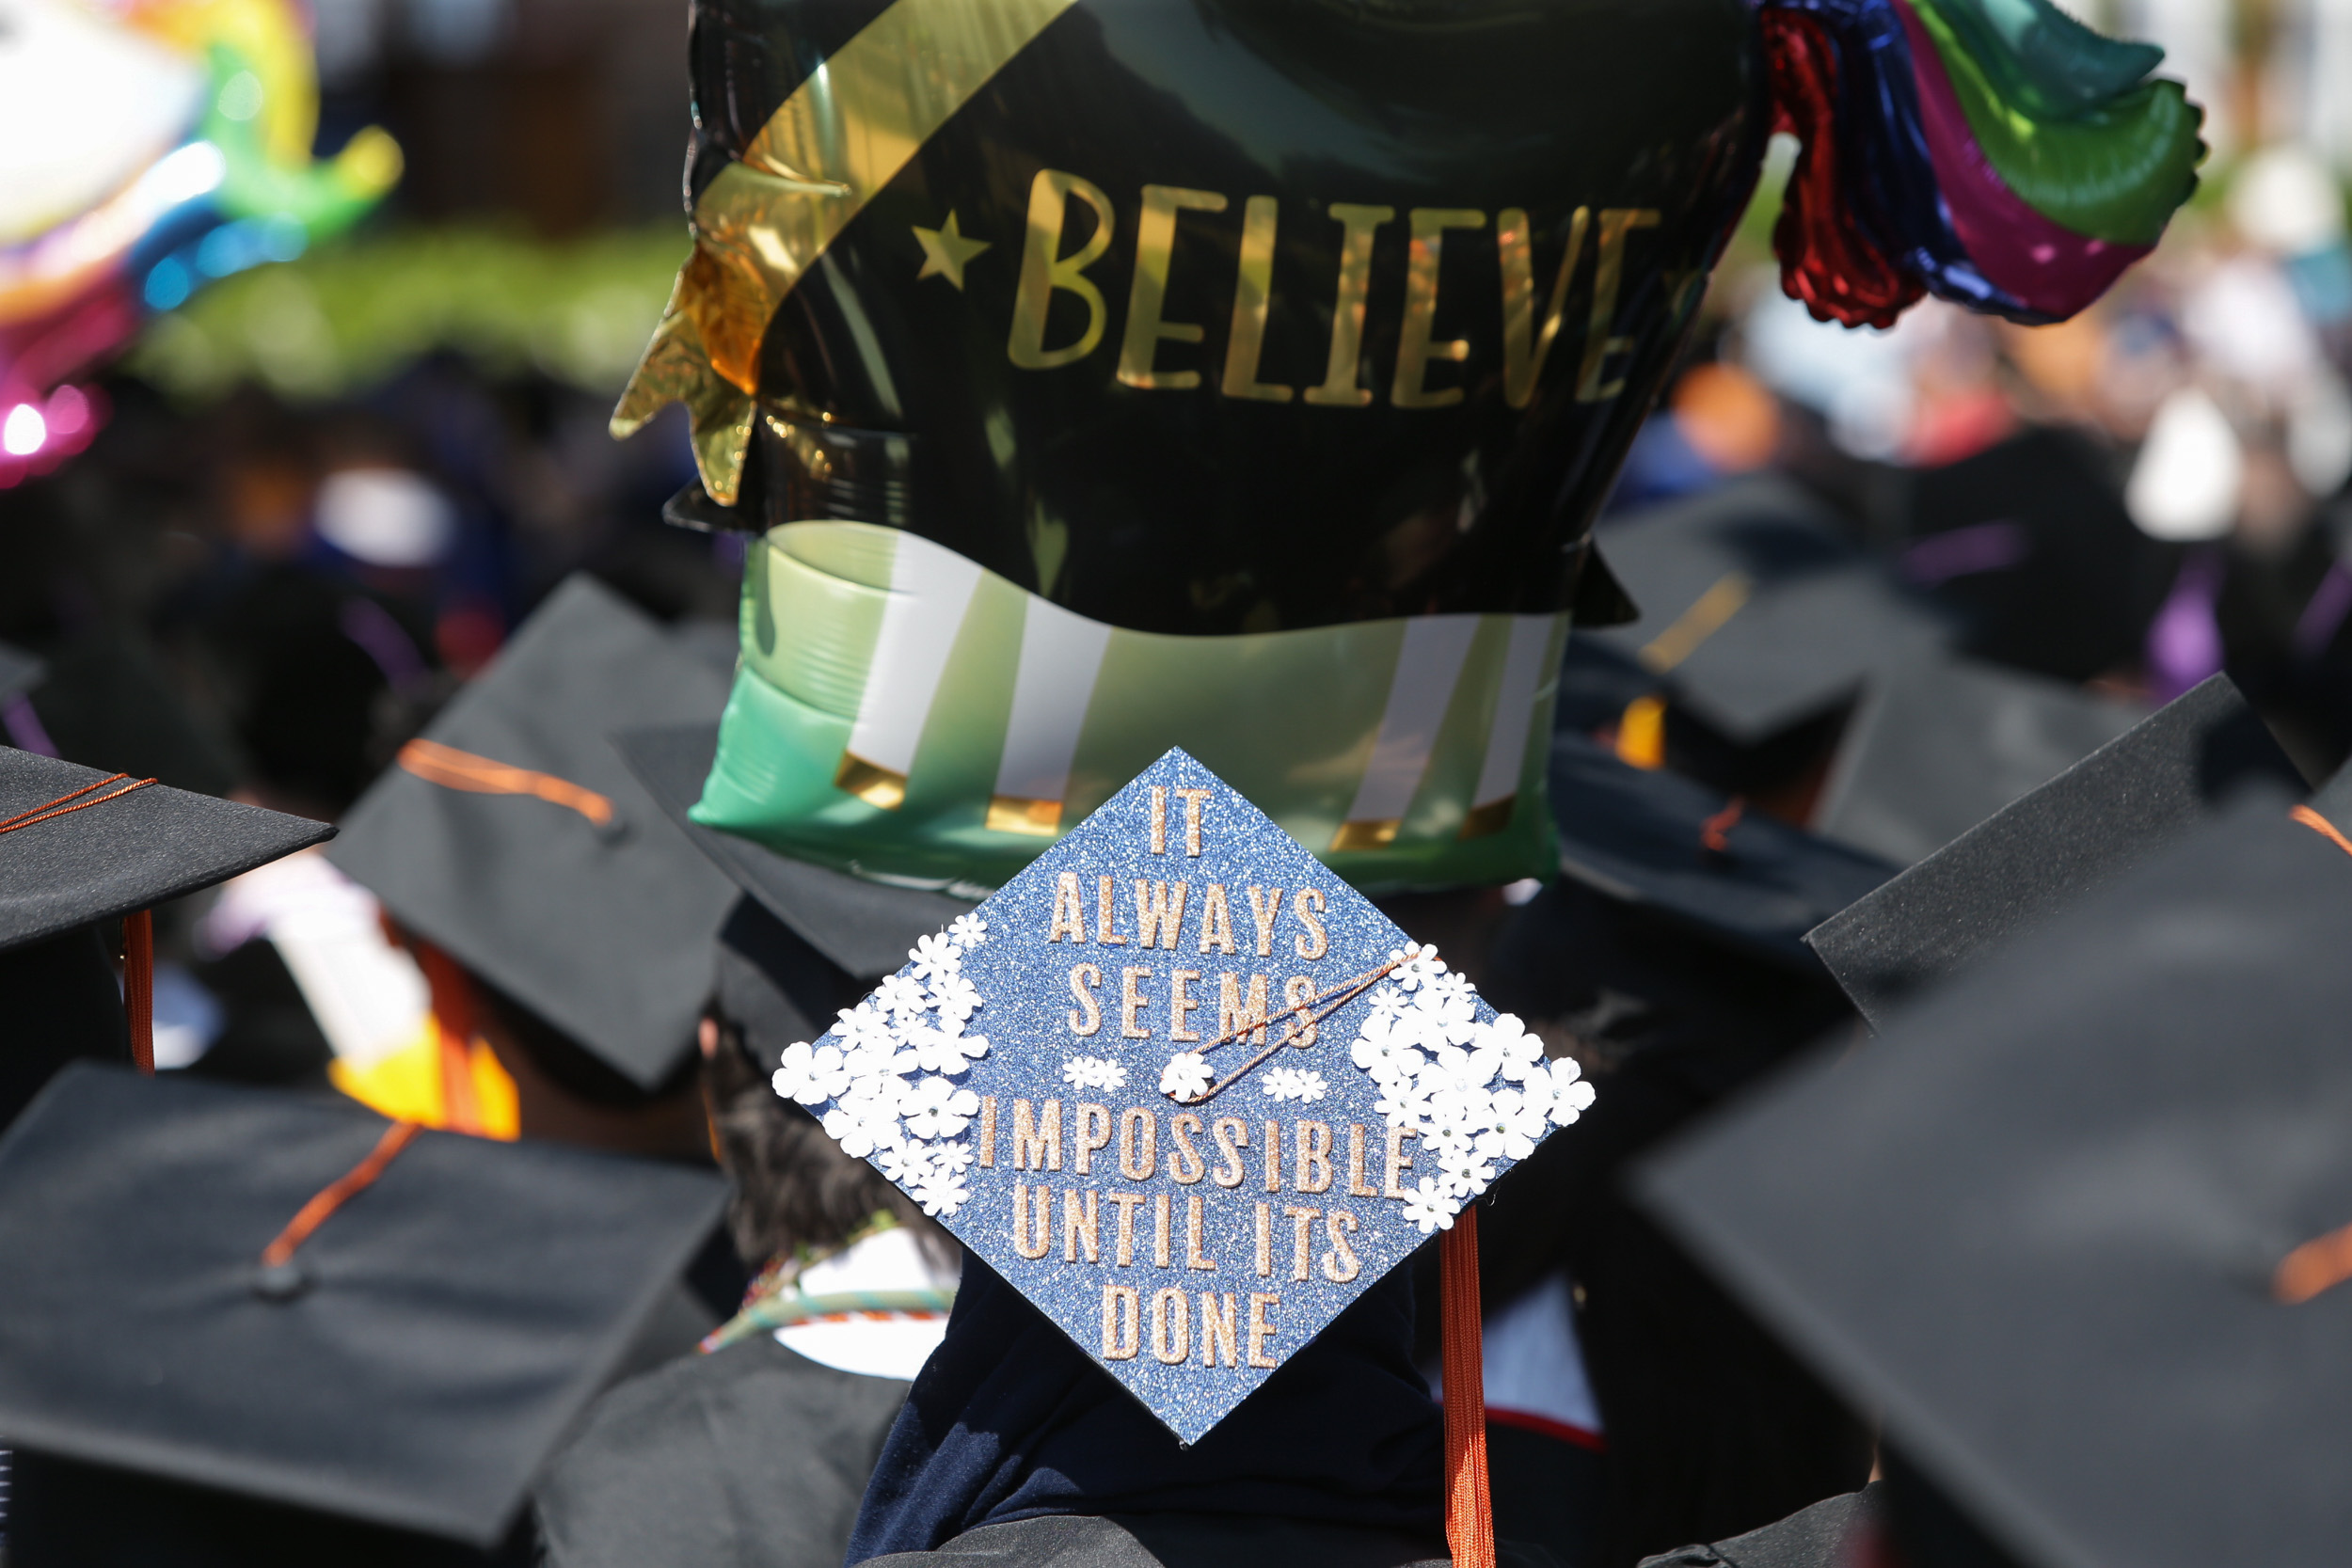 Graduation cap reads: If always seems impossible until its done